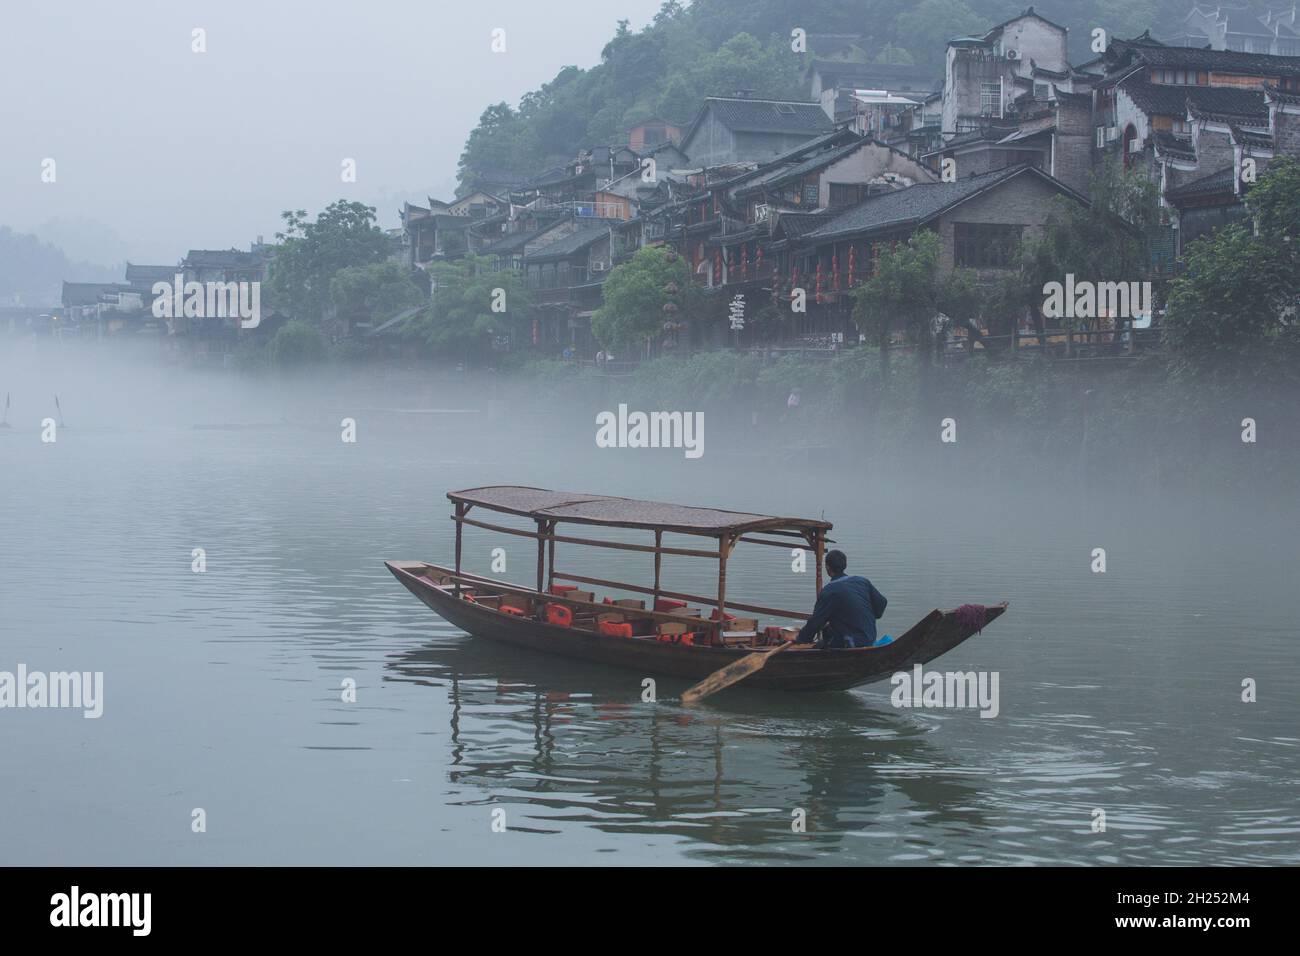 A man paddles a covered tour boat up the Tuojiang River in early-morning fog.  Fenghuang, China. Stock Photo